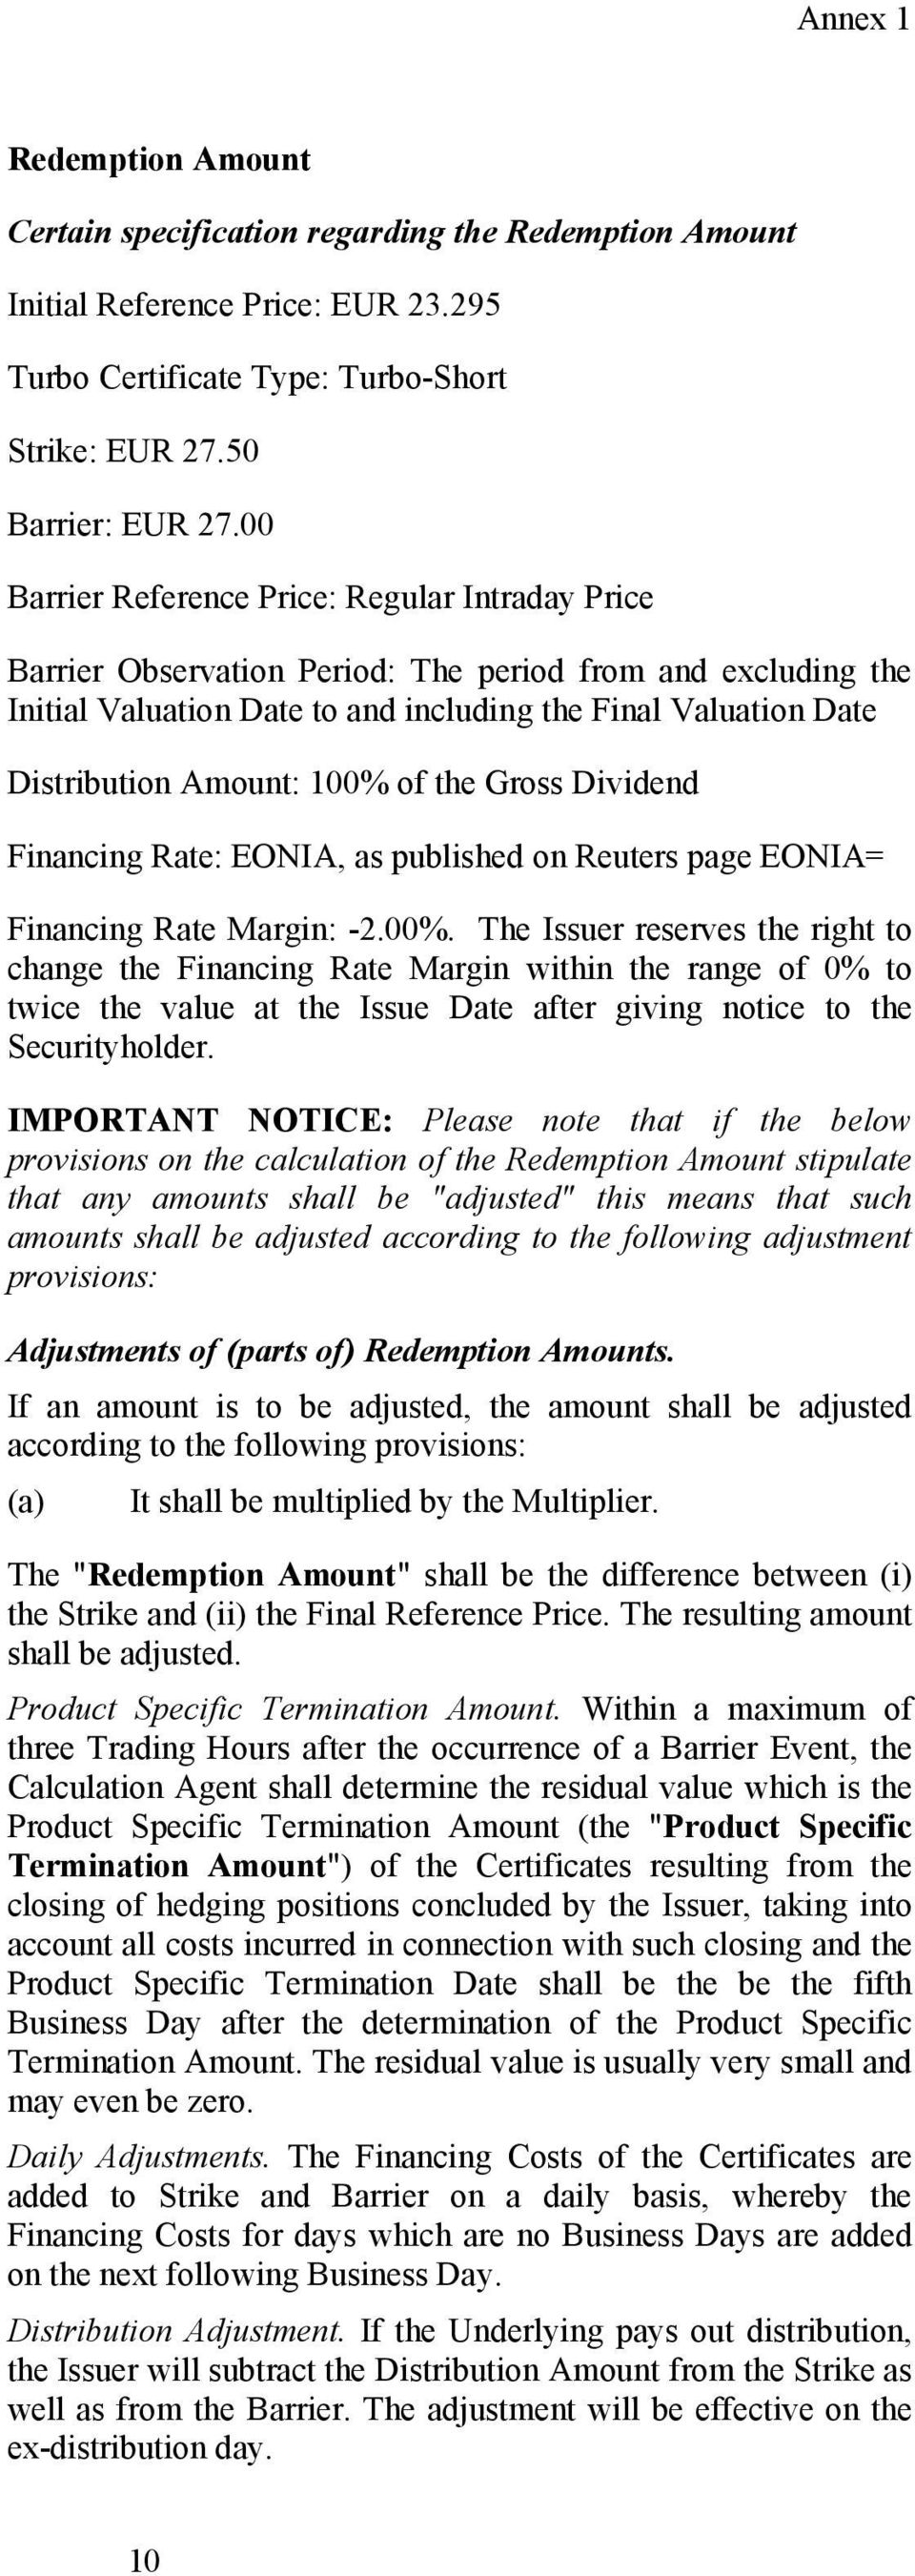 100% of the Gross Dividend Financing Rate: EONIA, as published on Reuters page EONIA= Financing Rate Margin: -2.00%. The Issuer reserves the right to change the Financing Rate Margin within the range of 0% to twice the value at the Issue Date after giving notice to the Securityholder.